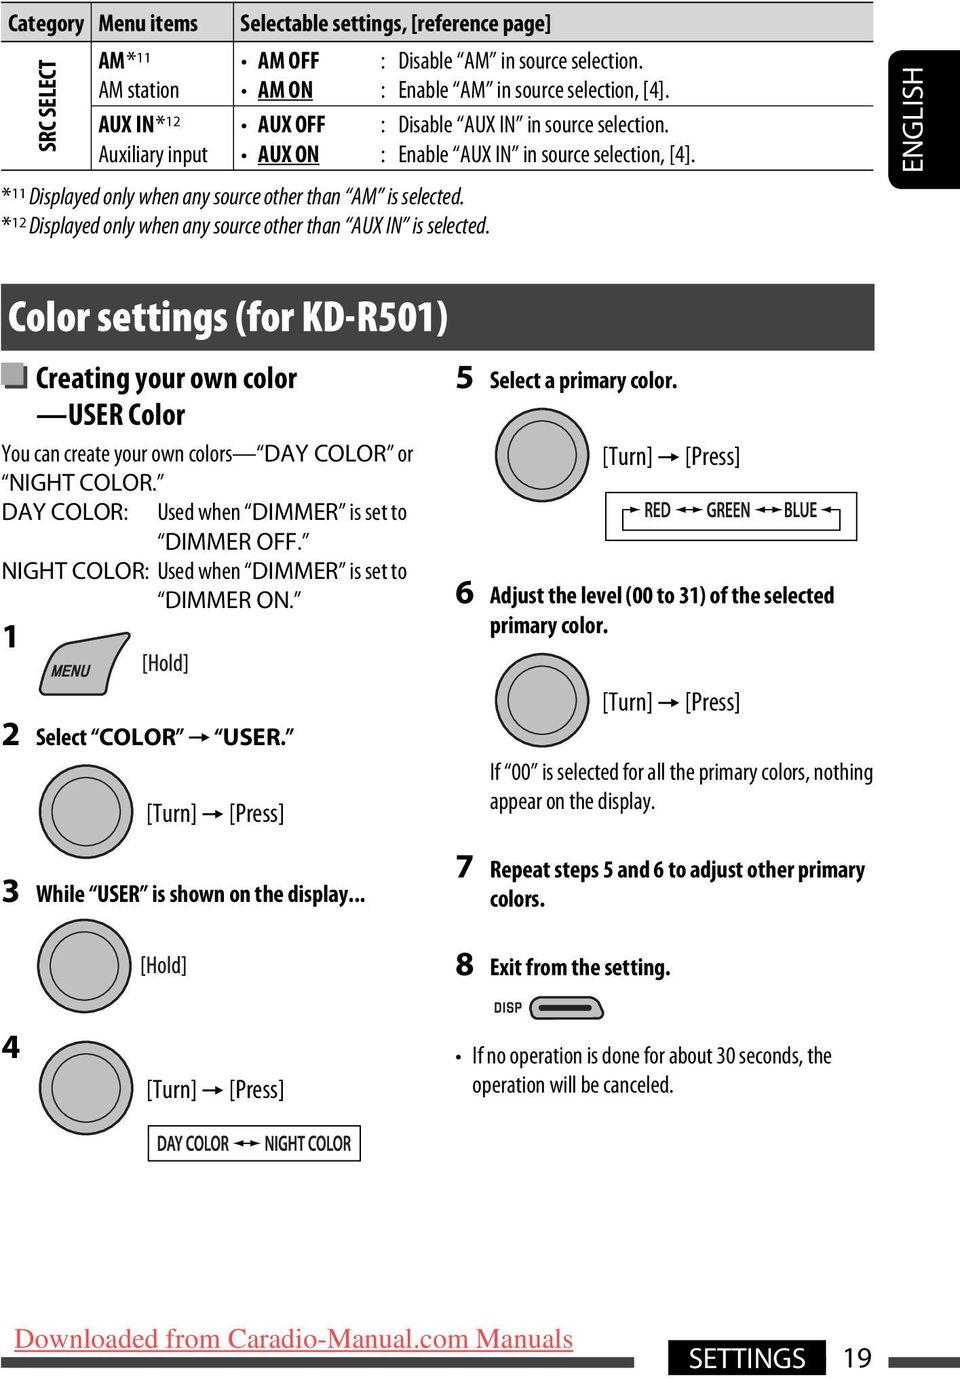 : Enable AUX IN in source selection, [4]. ENGLISH Color settings (for KD-R501) Creating your own color USER Color You can create your own colors DAY COLOR or NIGHT COLOR.